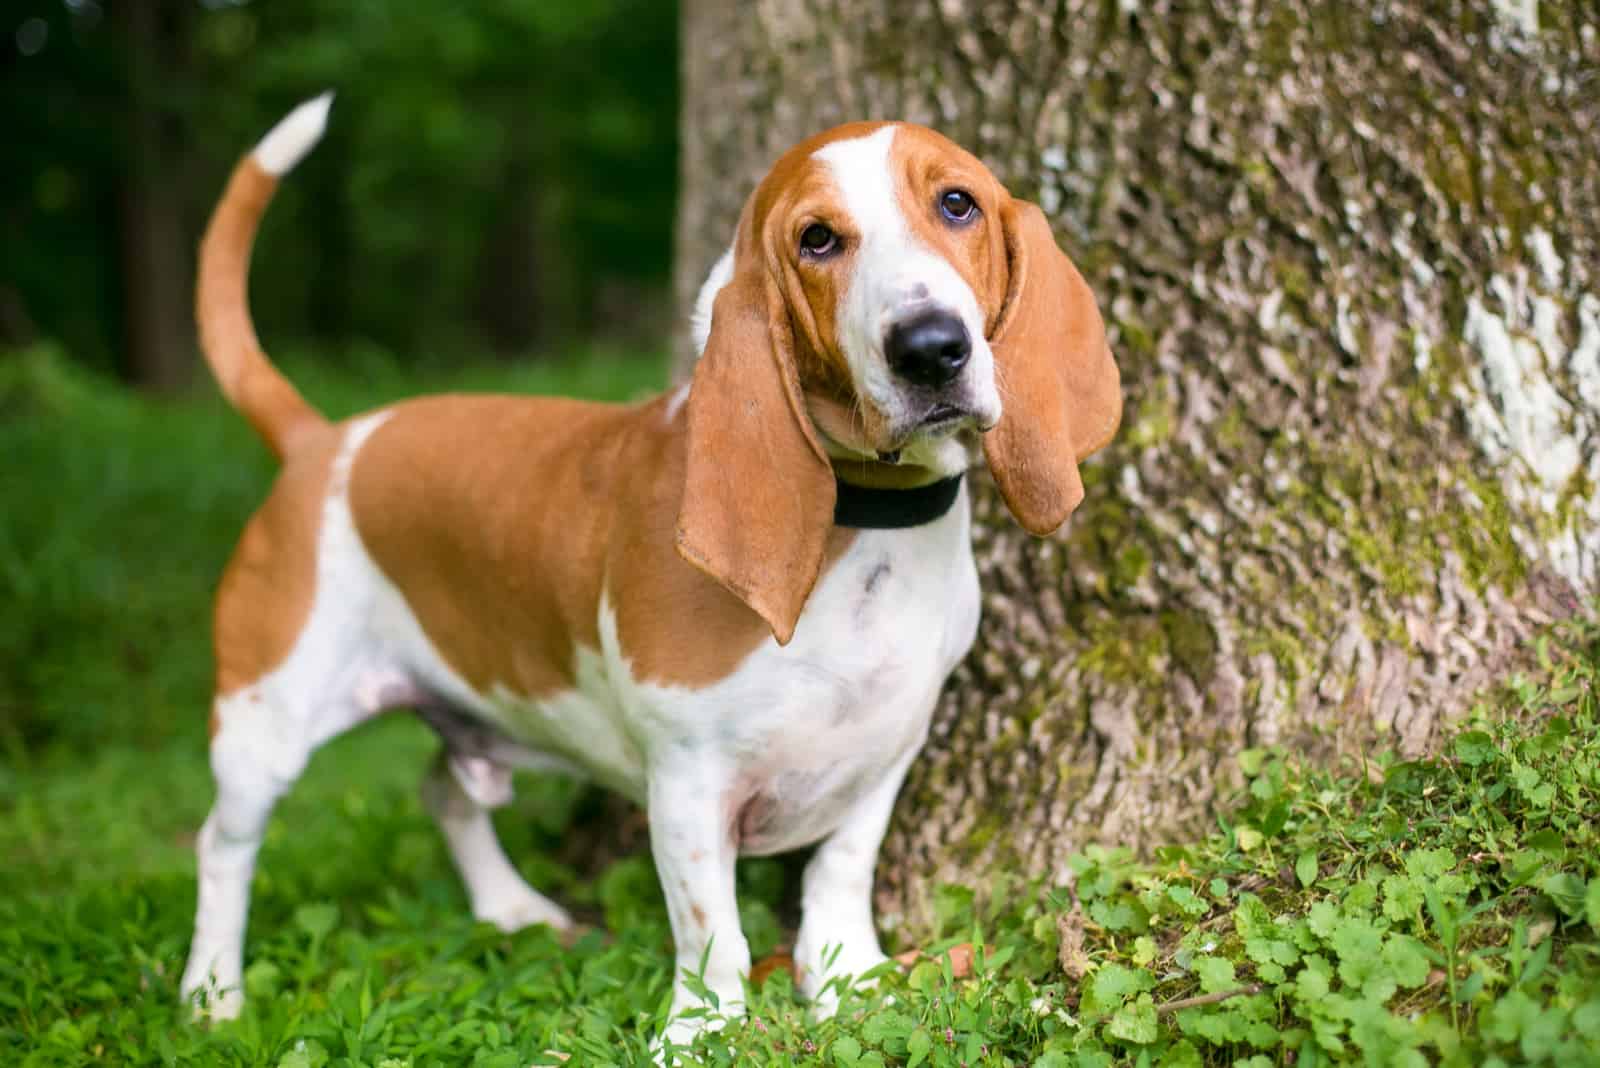 the beautiful Basset Hound stands on the grass